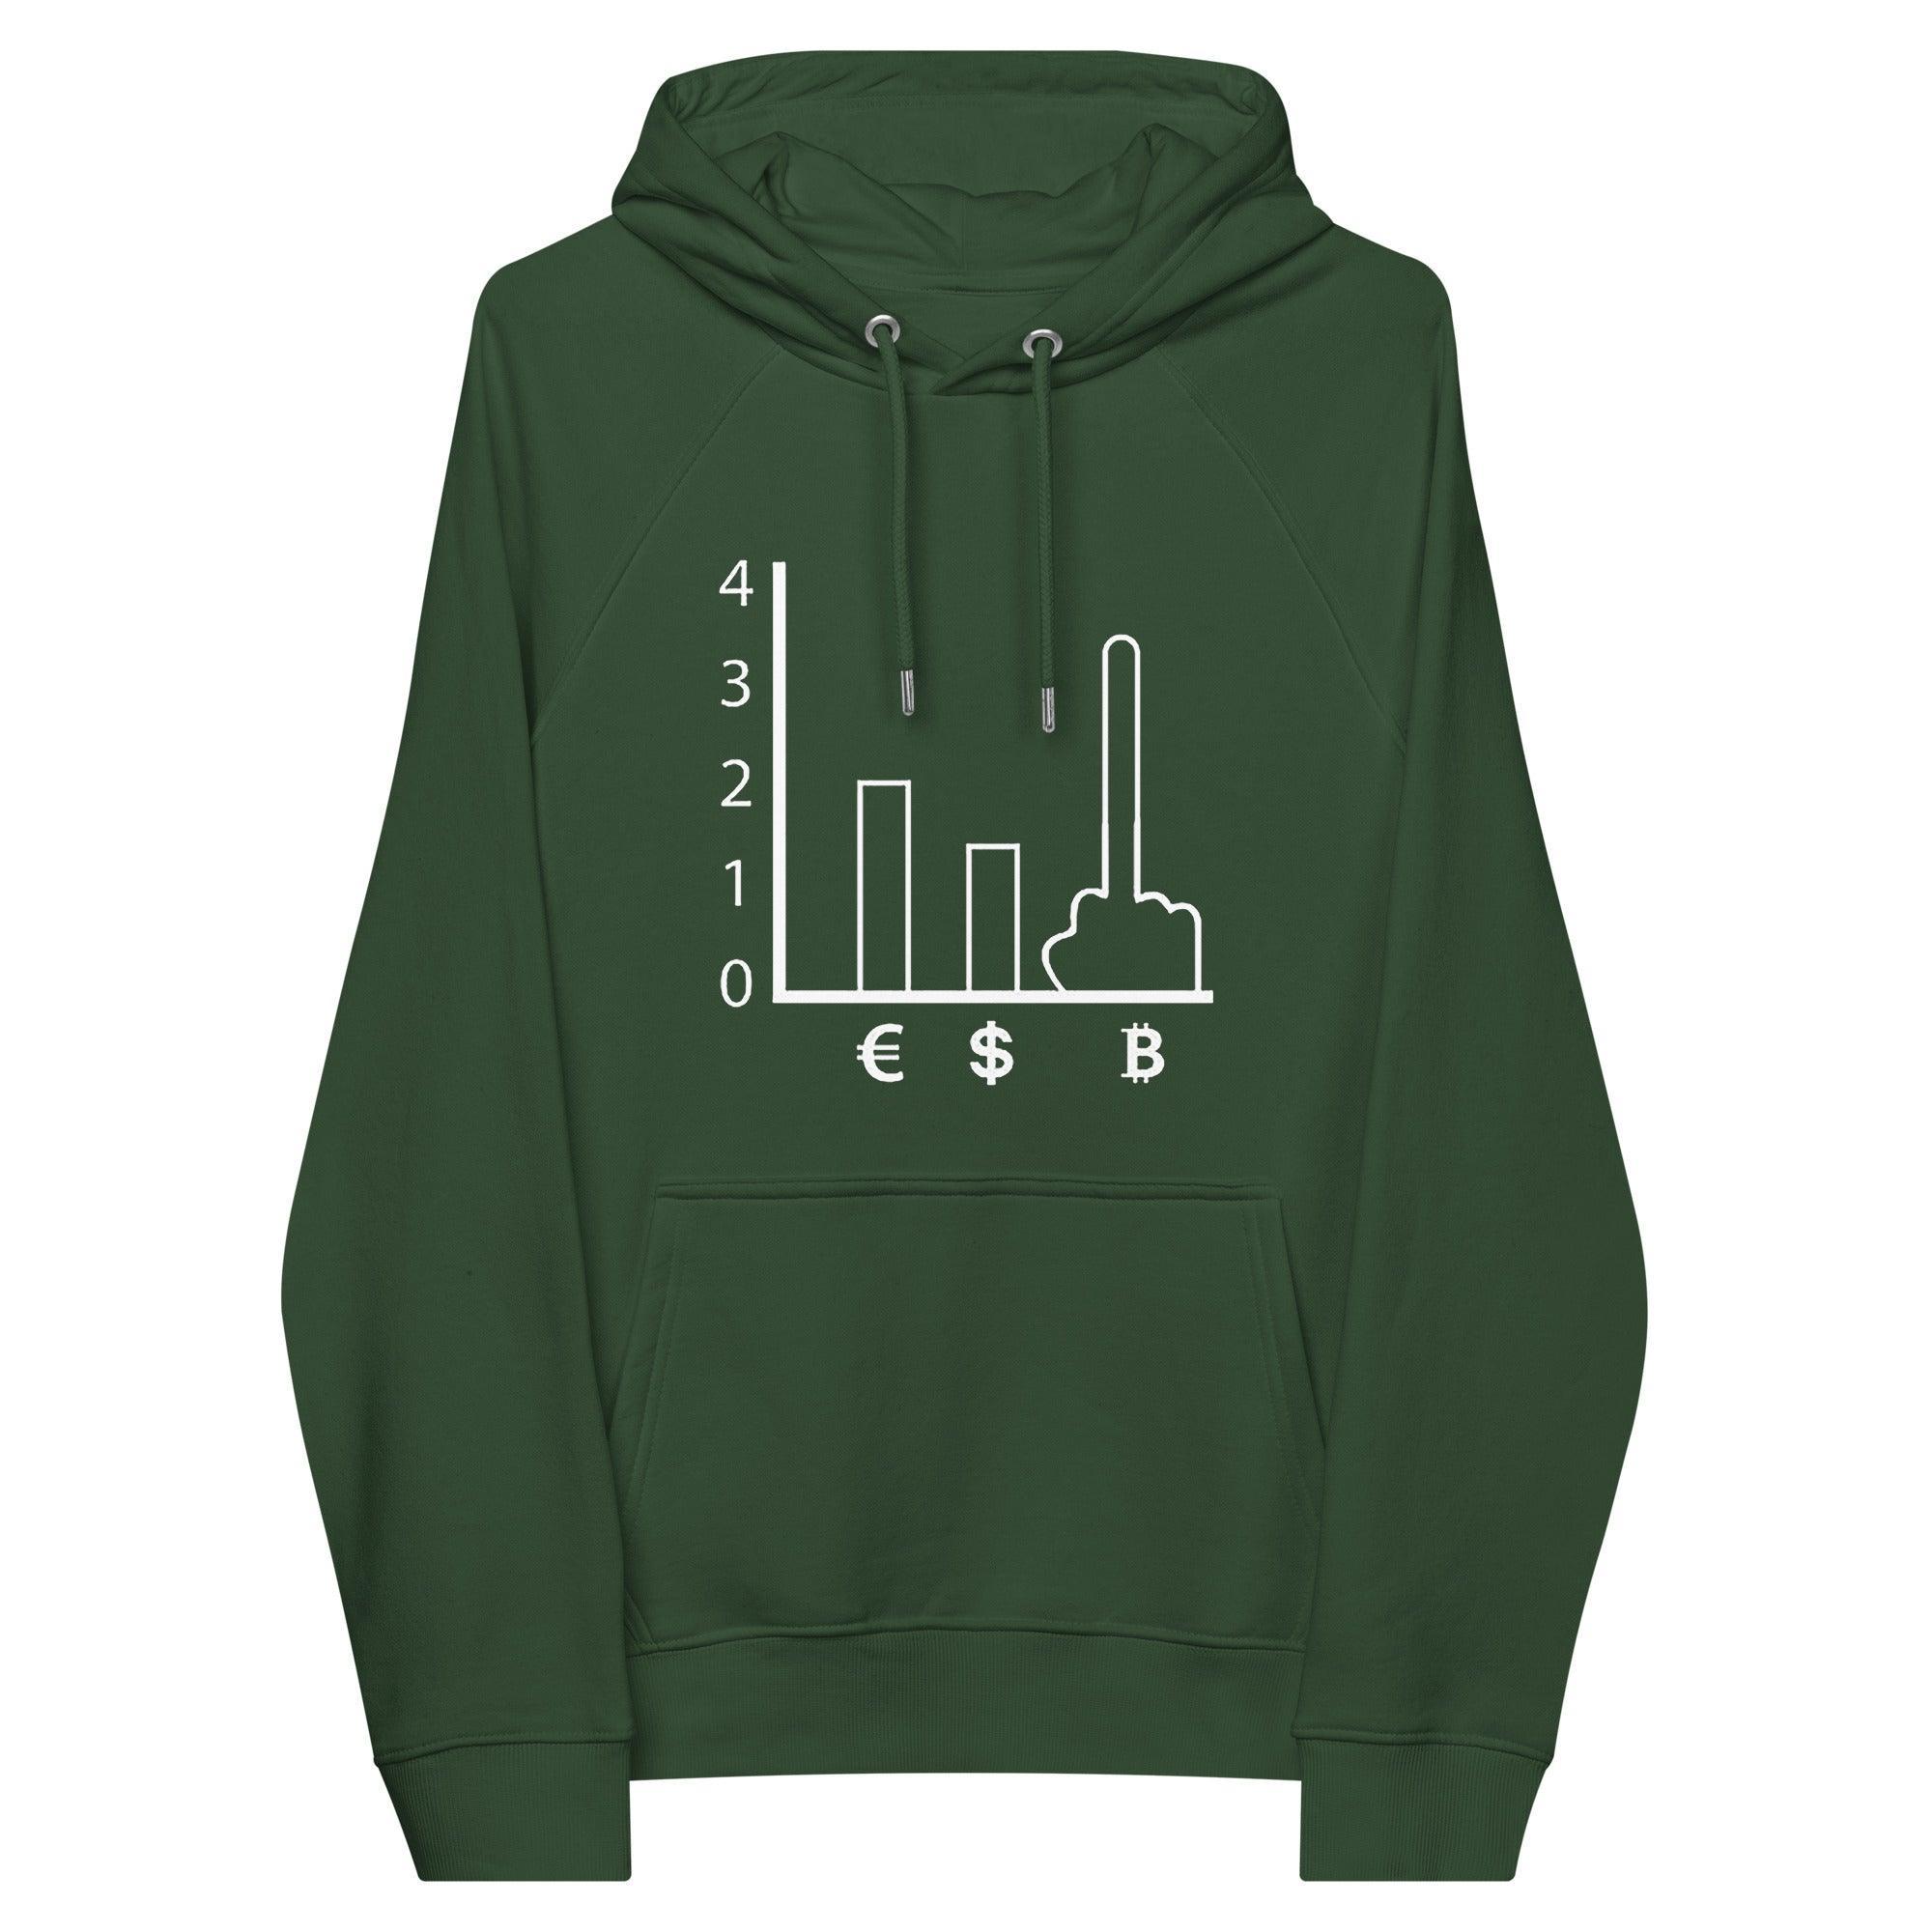 Bitcoin Status Pullover Hoodie - InvestmenTees